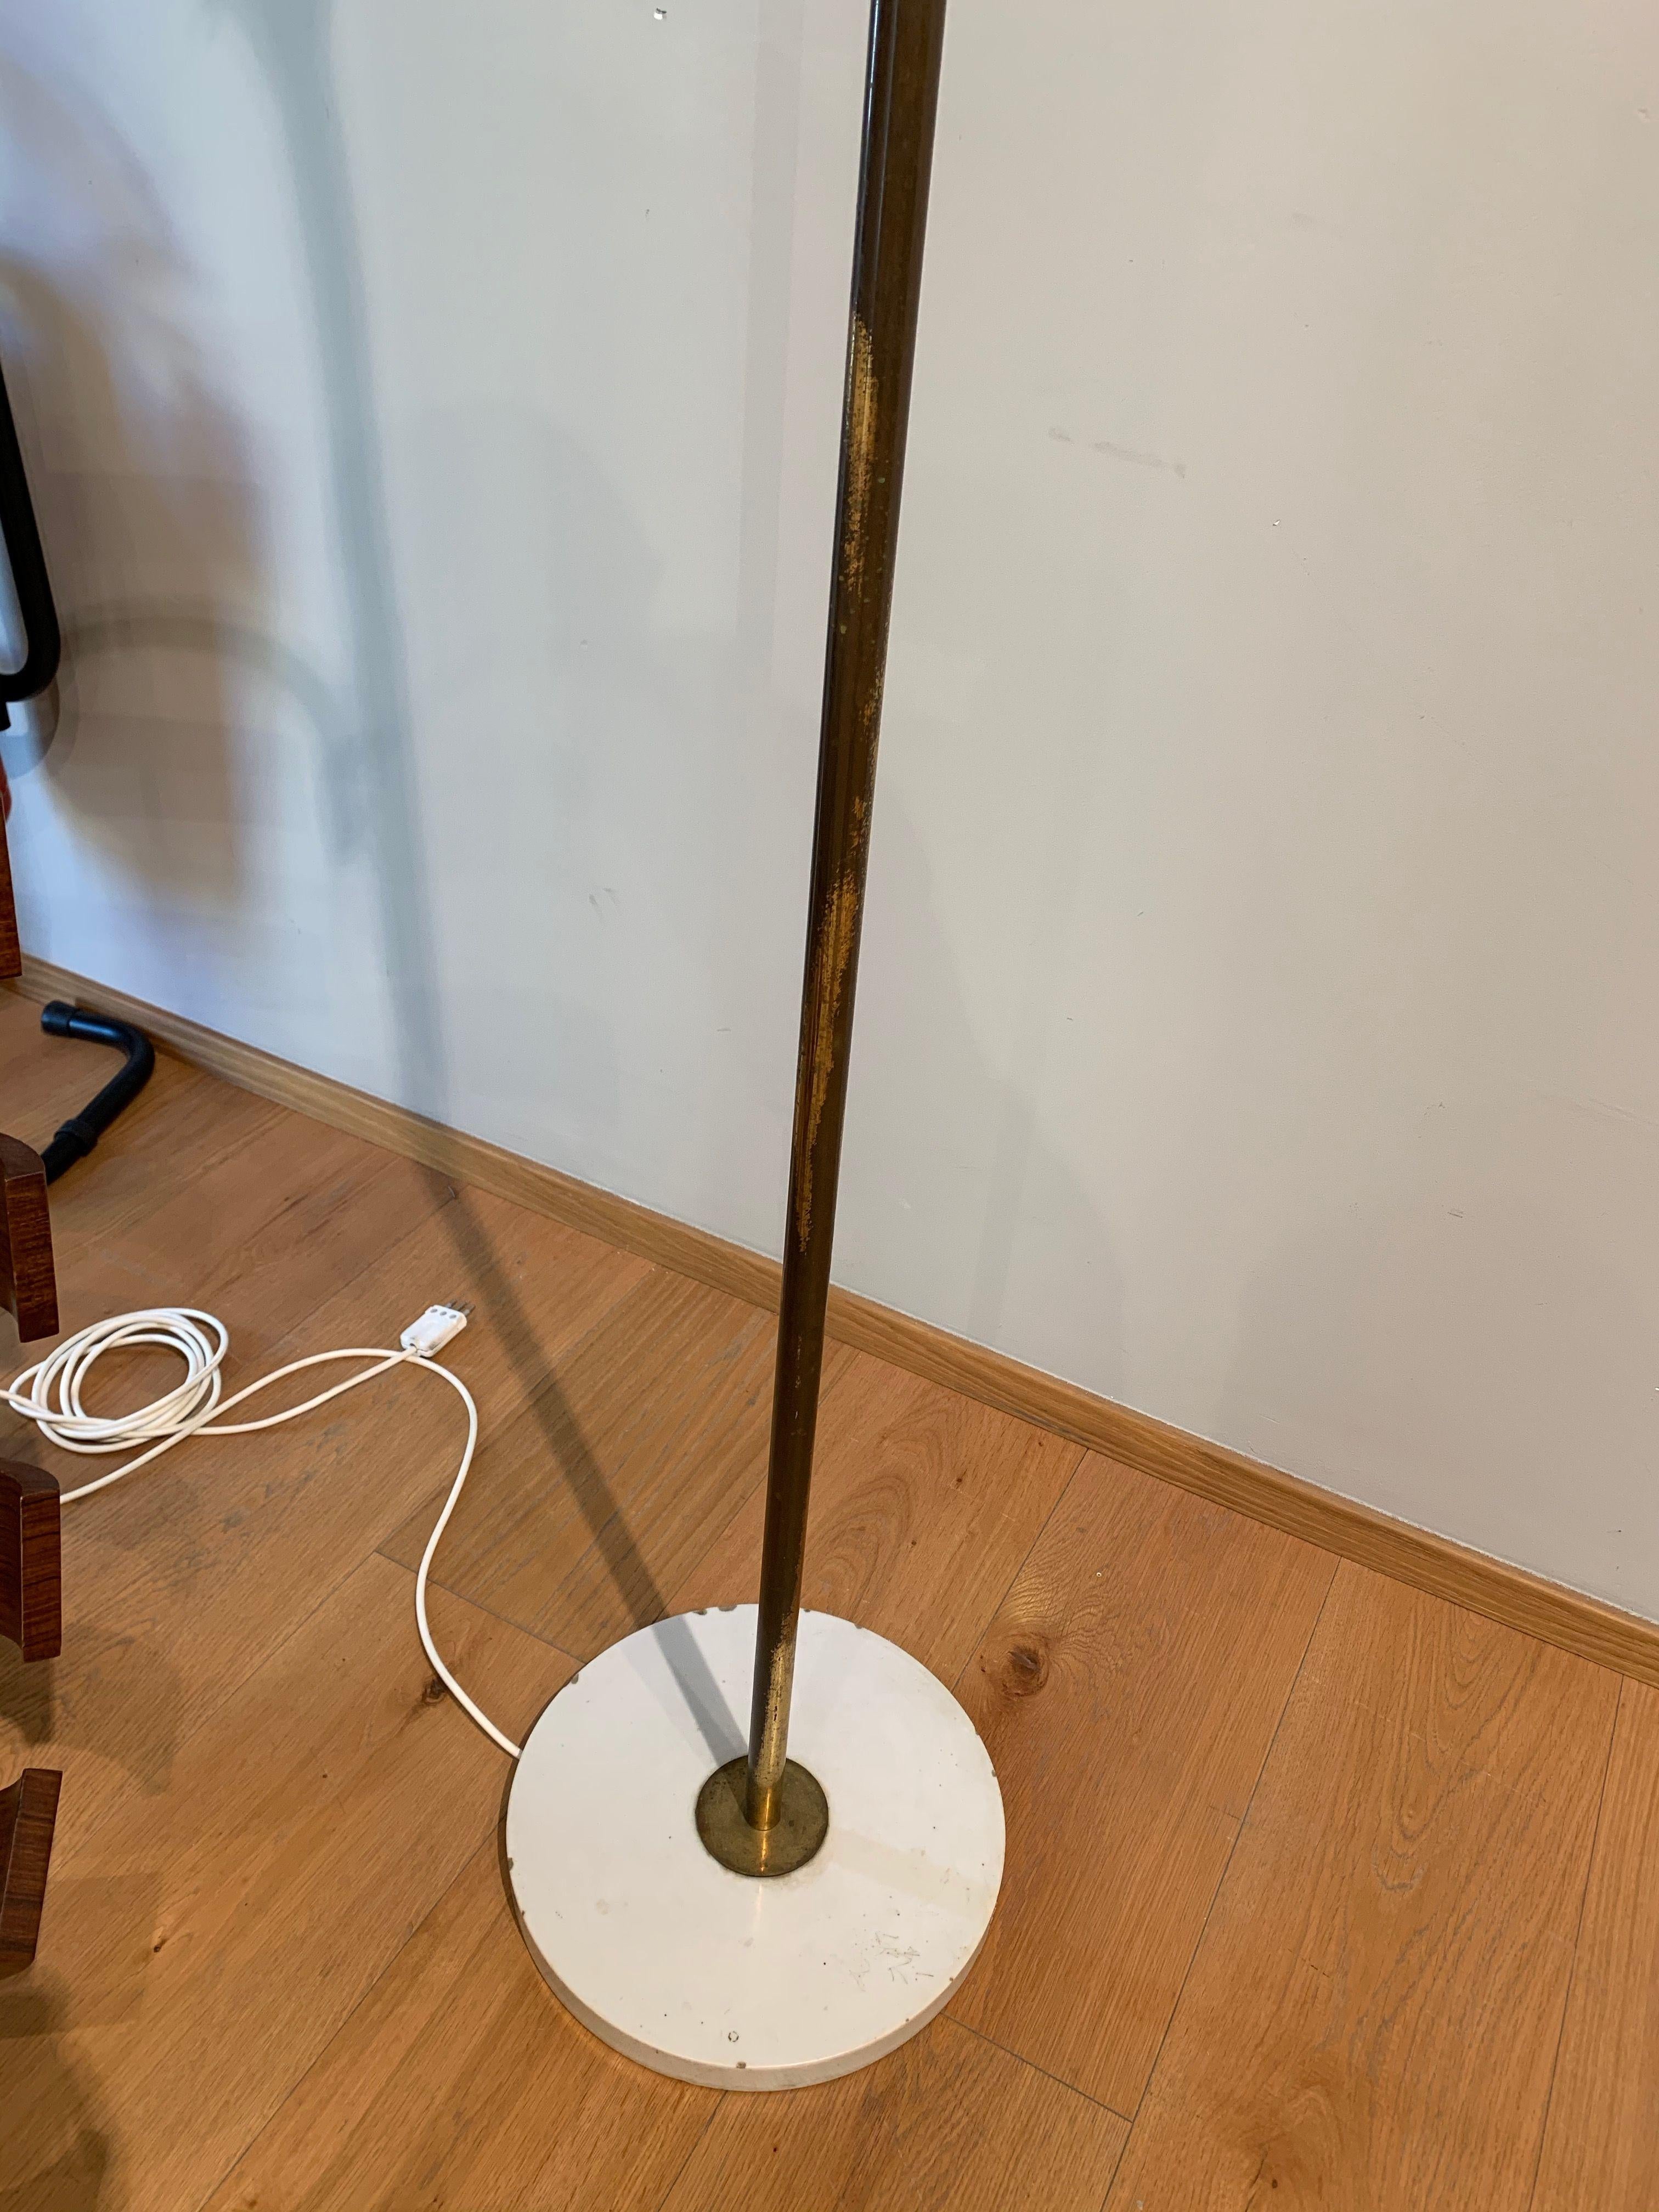 Gino Sarfatti Floor Lamp Model 1044, Made in Italy, 1952, Arteluce Production In Good Condition For Sale In Pambio Noranco, CH